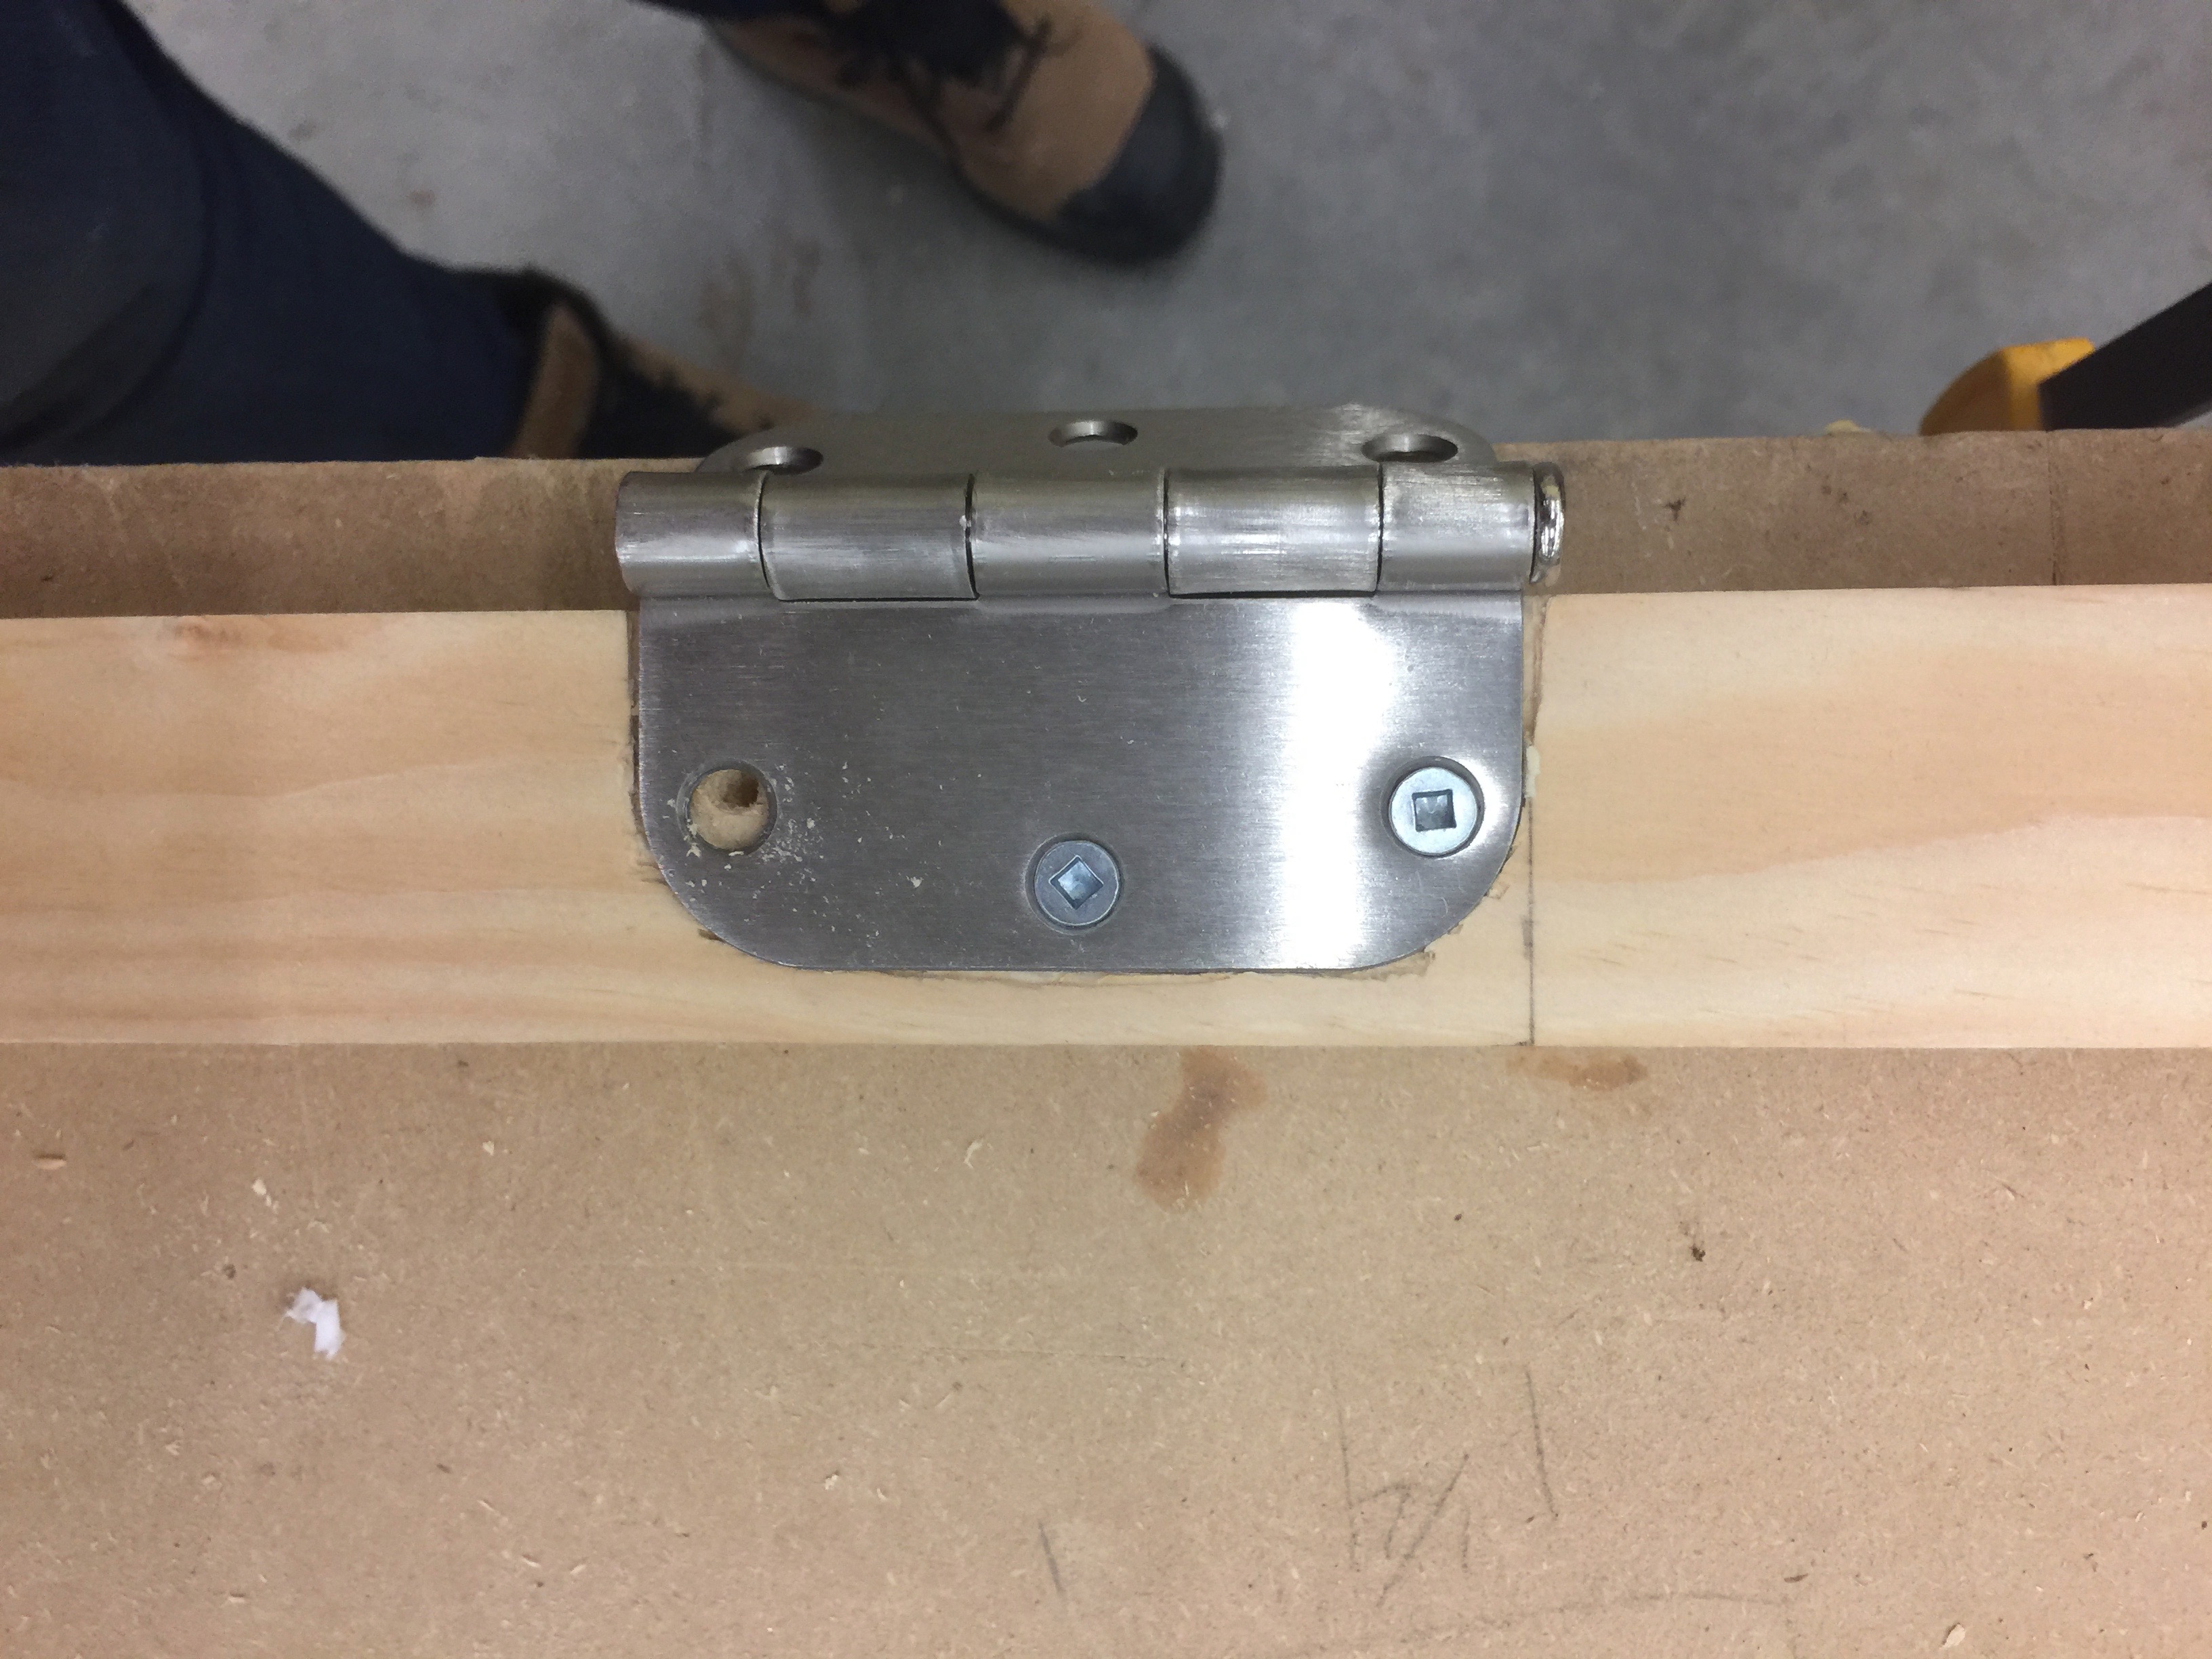 Attaching hinges to a piece of wood